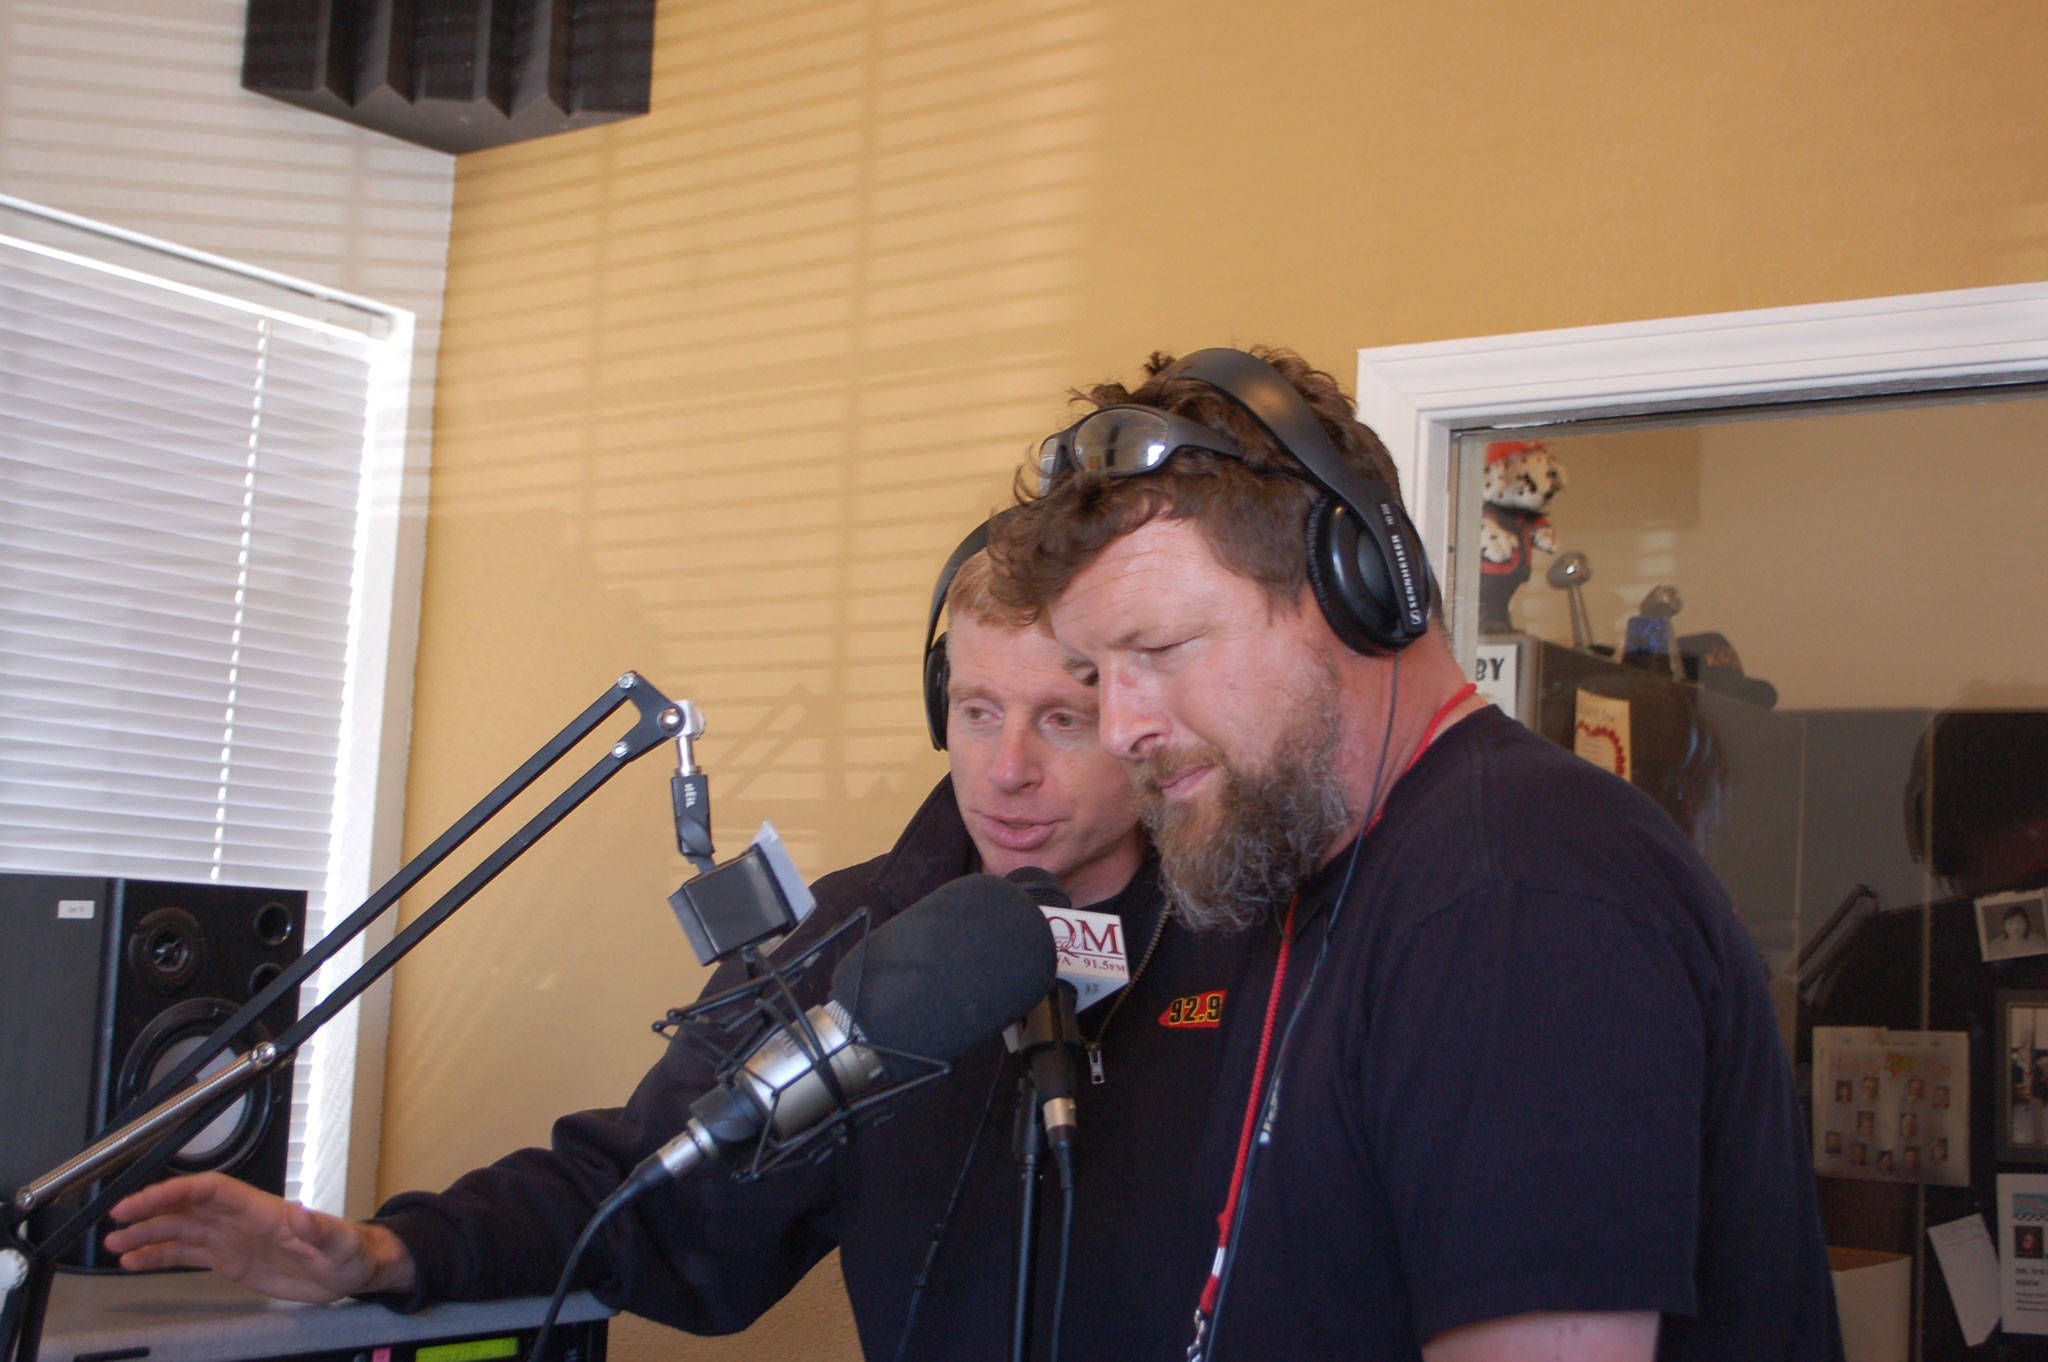 Left, John Reynolds and Brad Cash from 92.9 KISM Classic Rock went on air with 91.5 KSQM’s Dick Goodman on Friday, July 28, to talk about the Streett family after a tragic car accident in Colorado took the lives of two of the family members. Sequim Gazette photos by Erin Hawkins